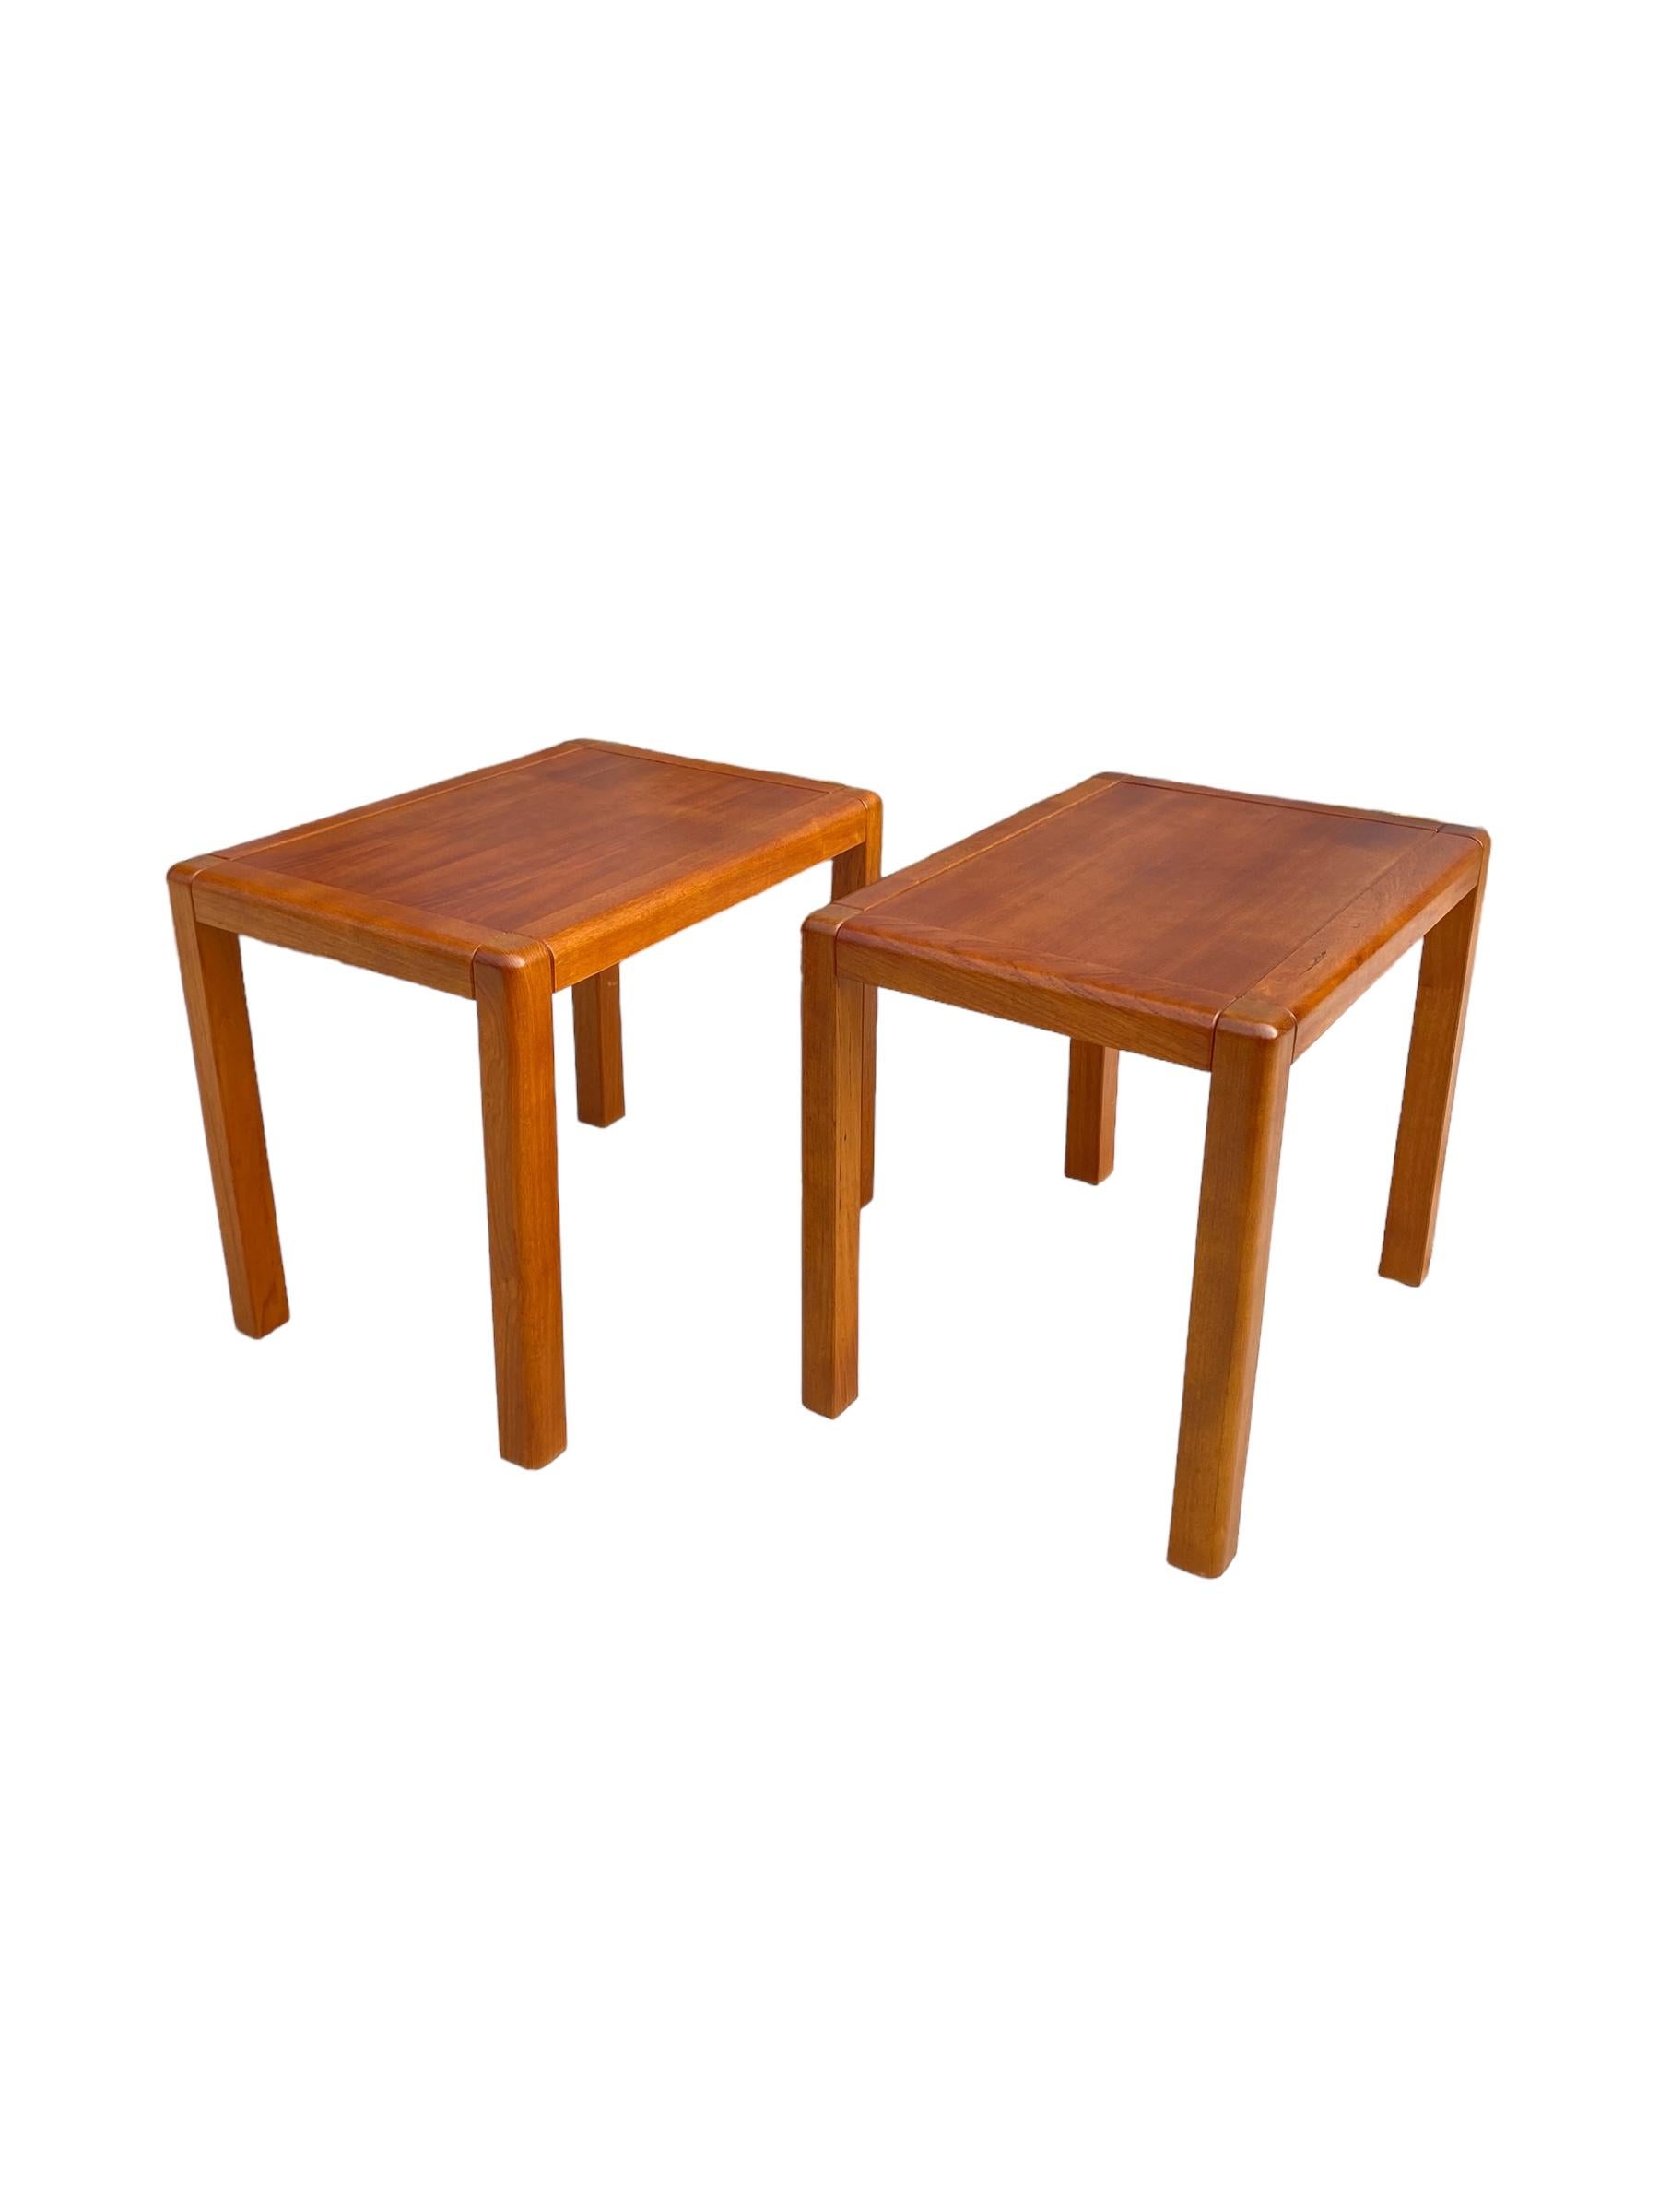 Pair of Danish modern teak end tables / bedside tables. Made in Denmark, these vintage tables have even grain and warm teak wood color. Sleek and minimal design. 